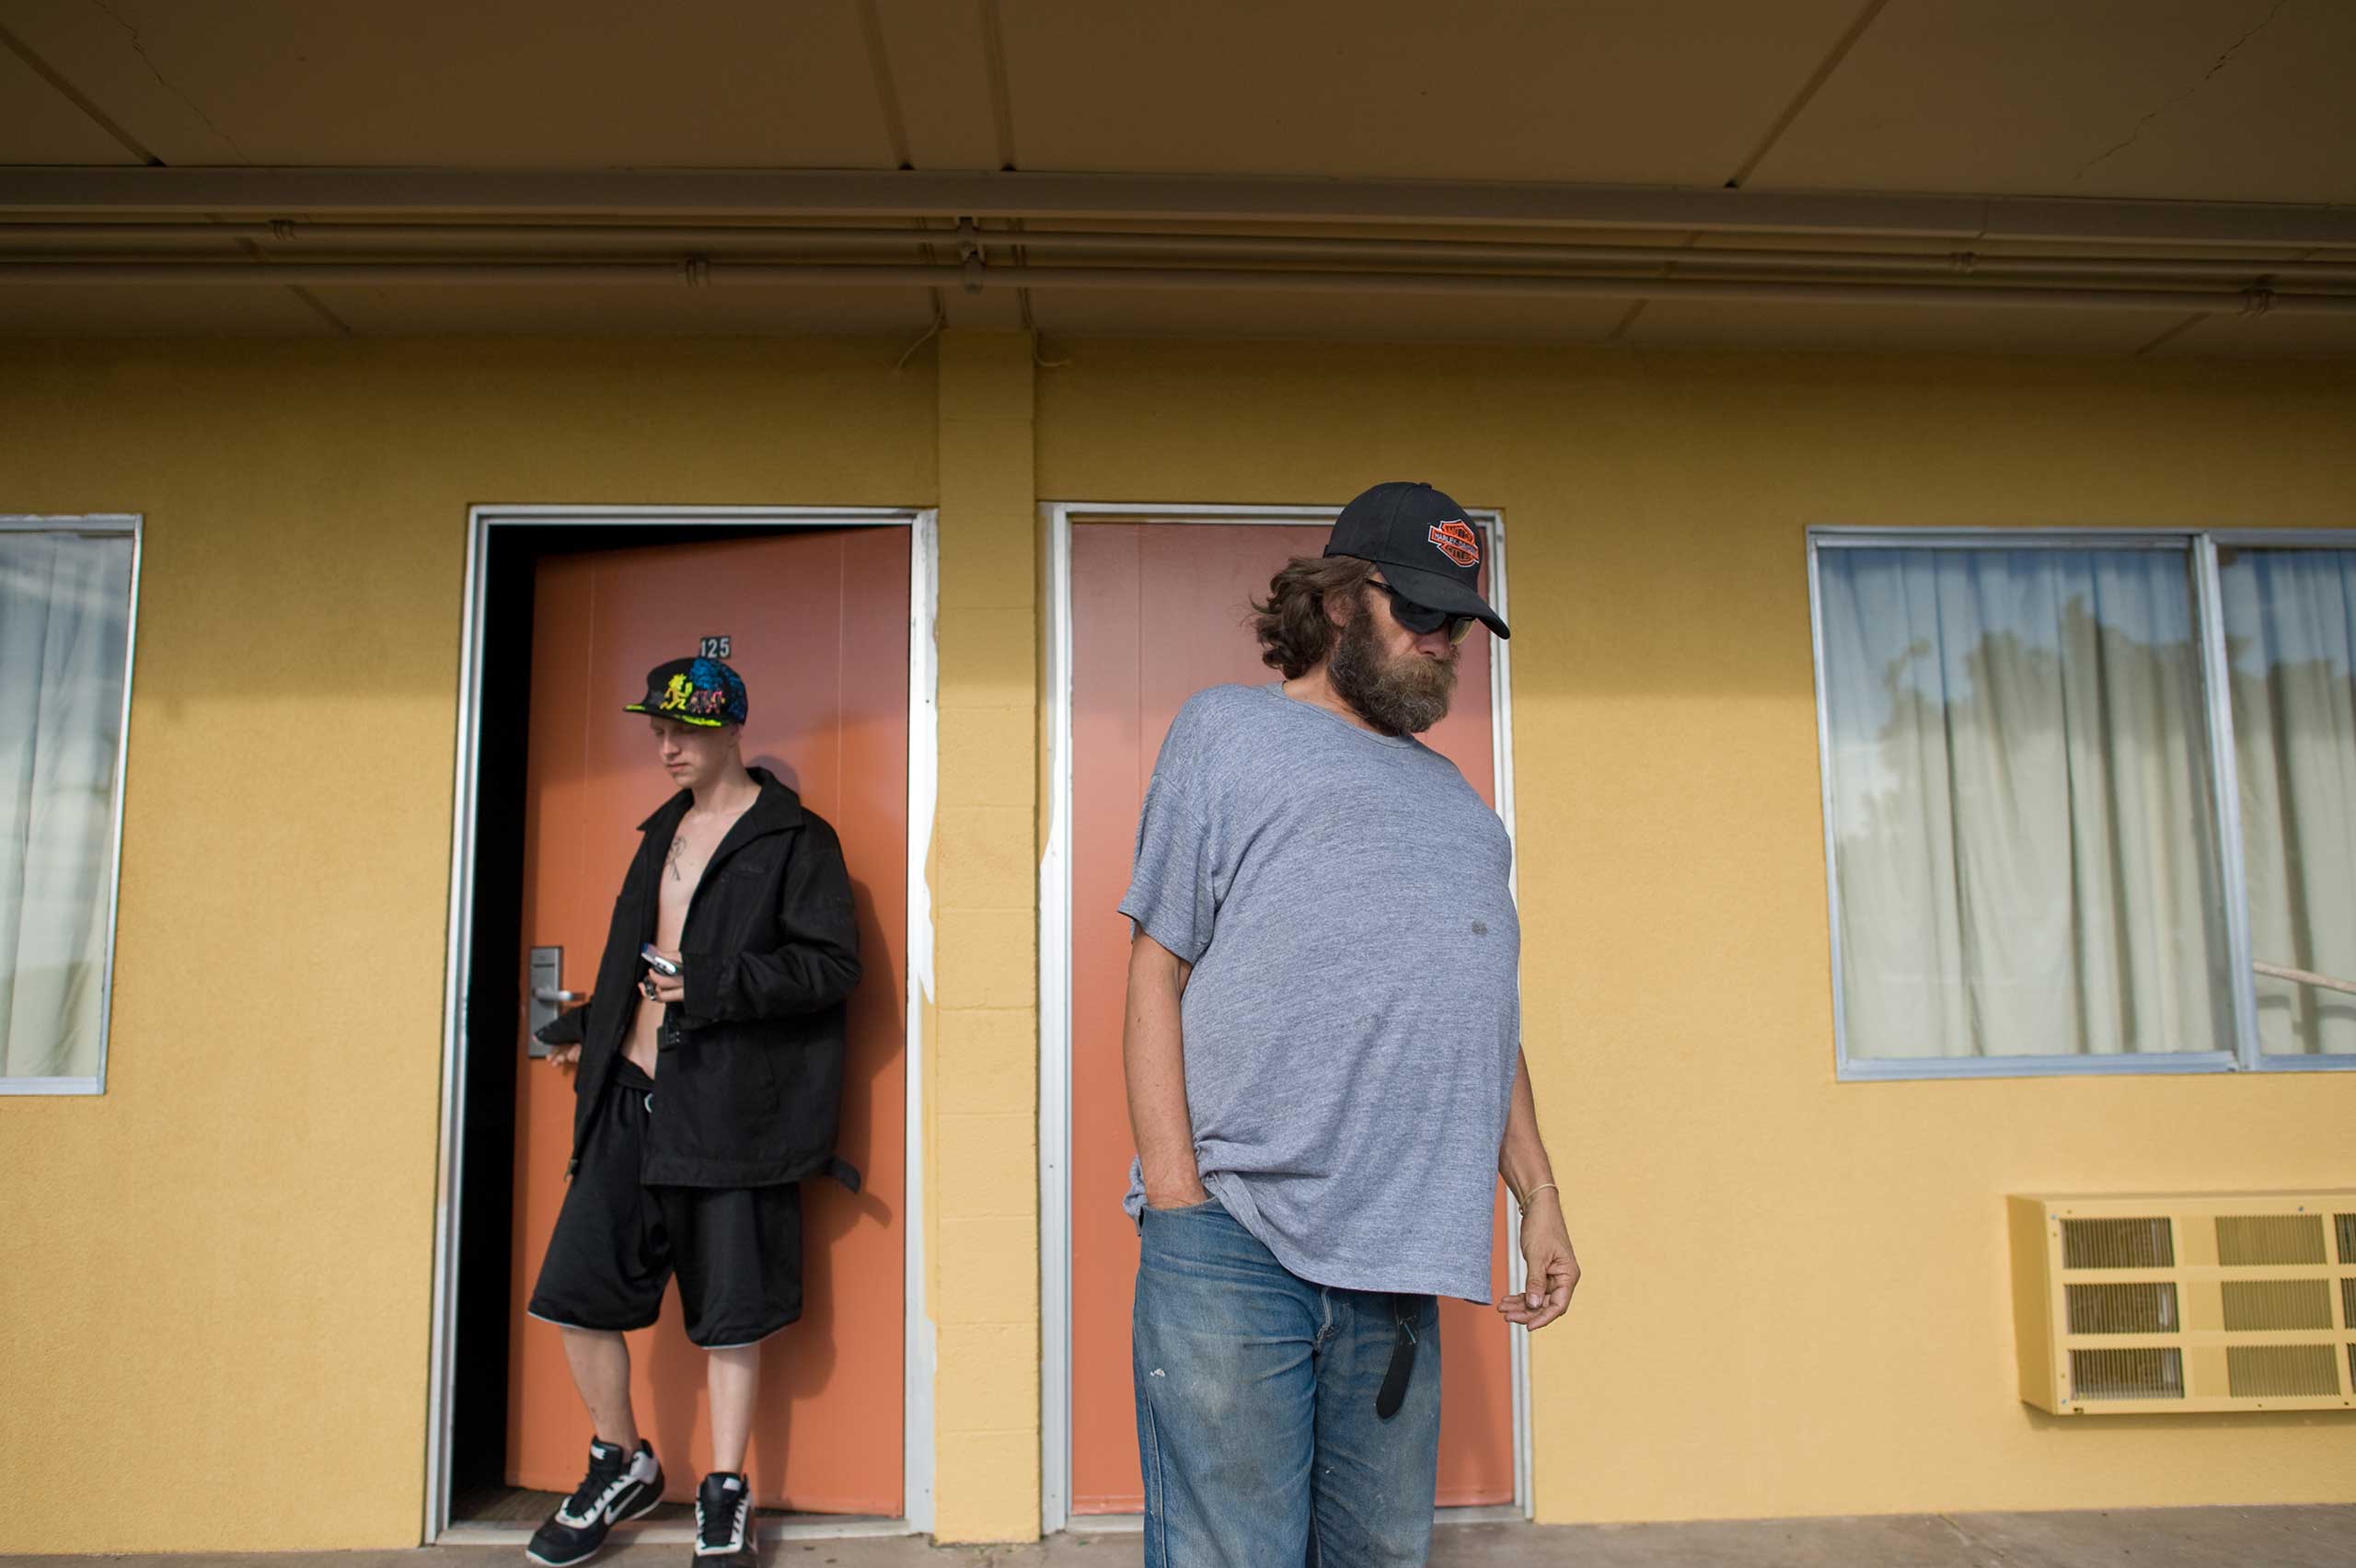 David and his father, Dave, leave a motel.